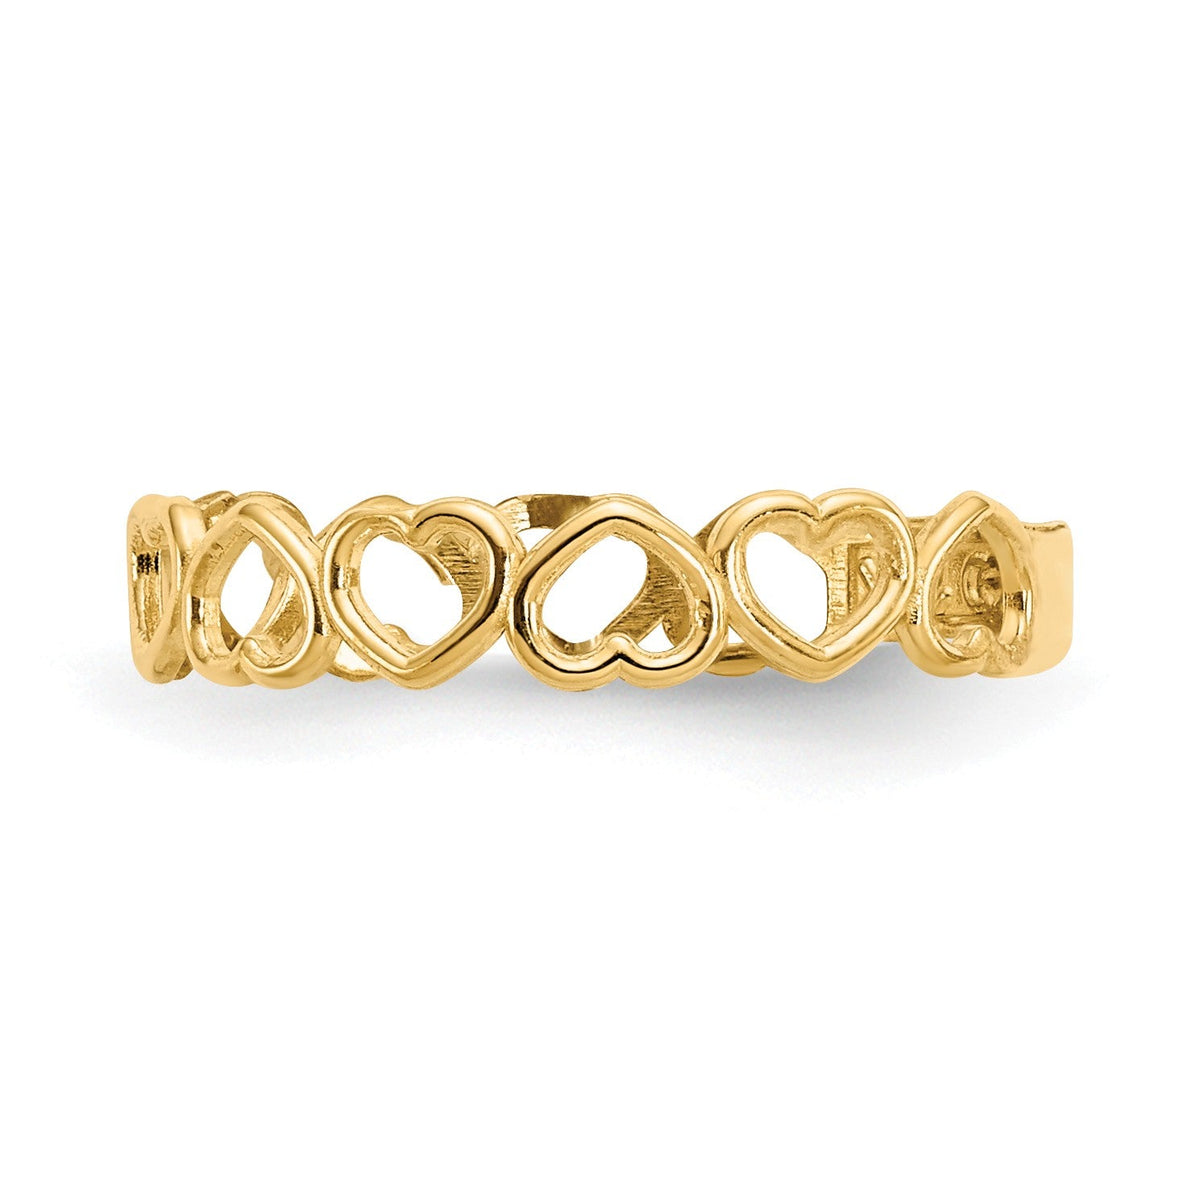 Alternate view of the Open Hearts Toe Ring in 14 Karat Gold by The Black Bow Jewelry Co.